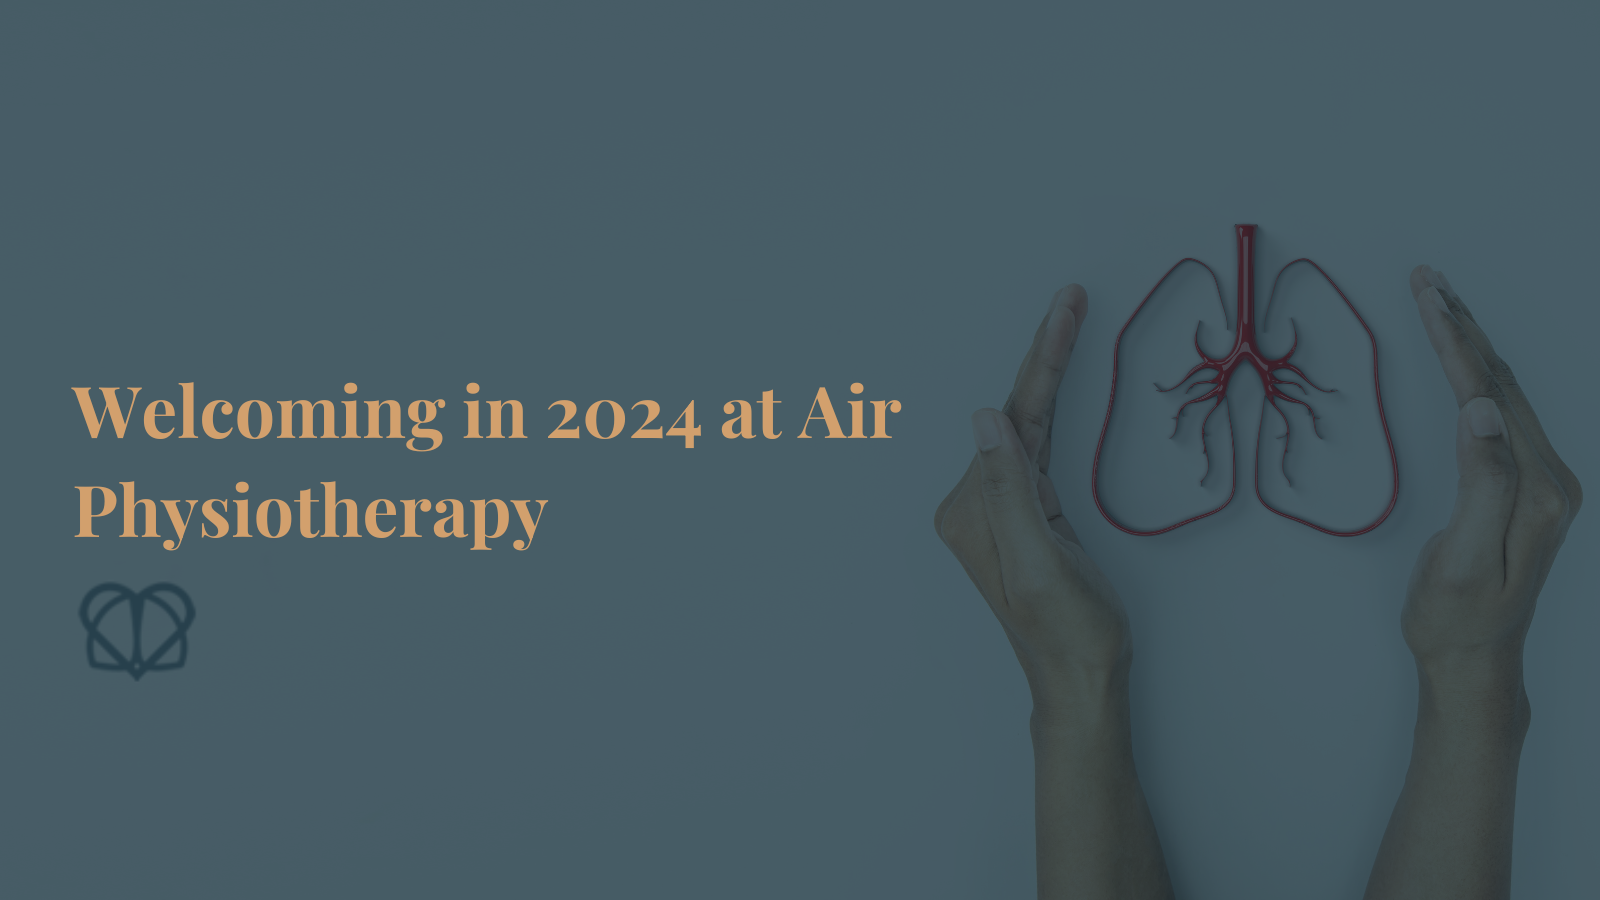 Air Physiotherapy 2024 breathing